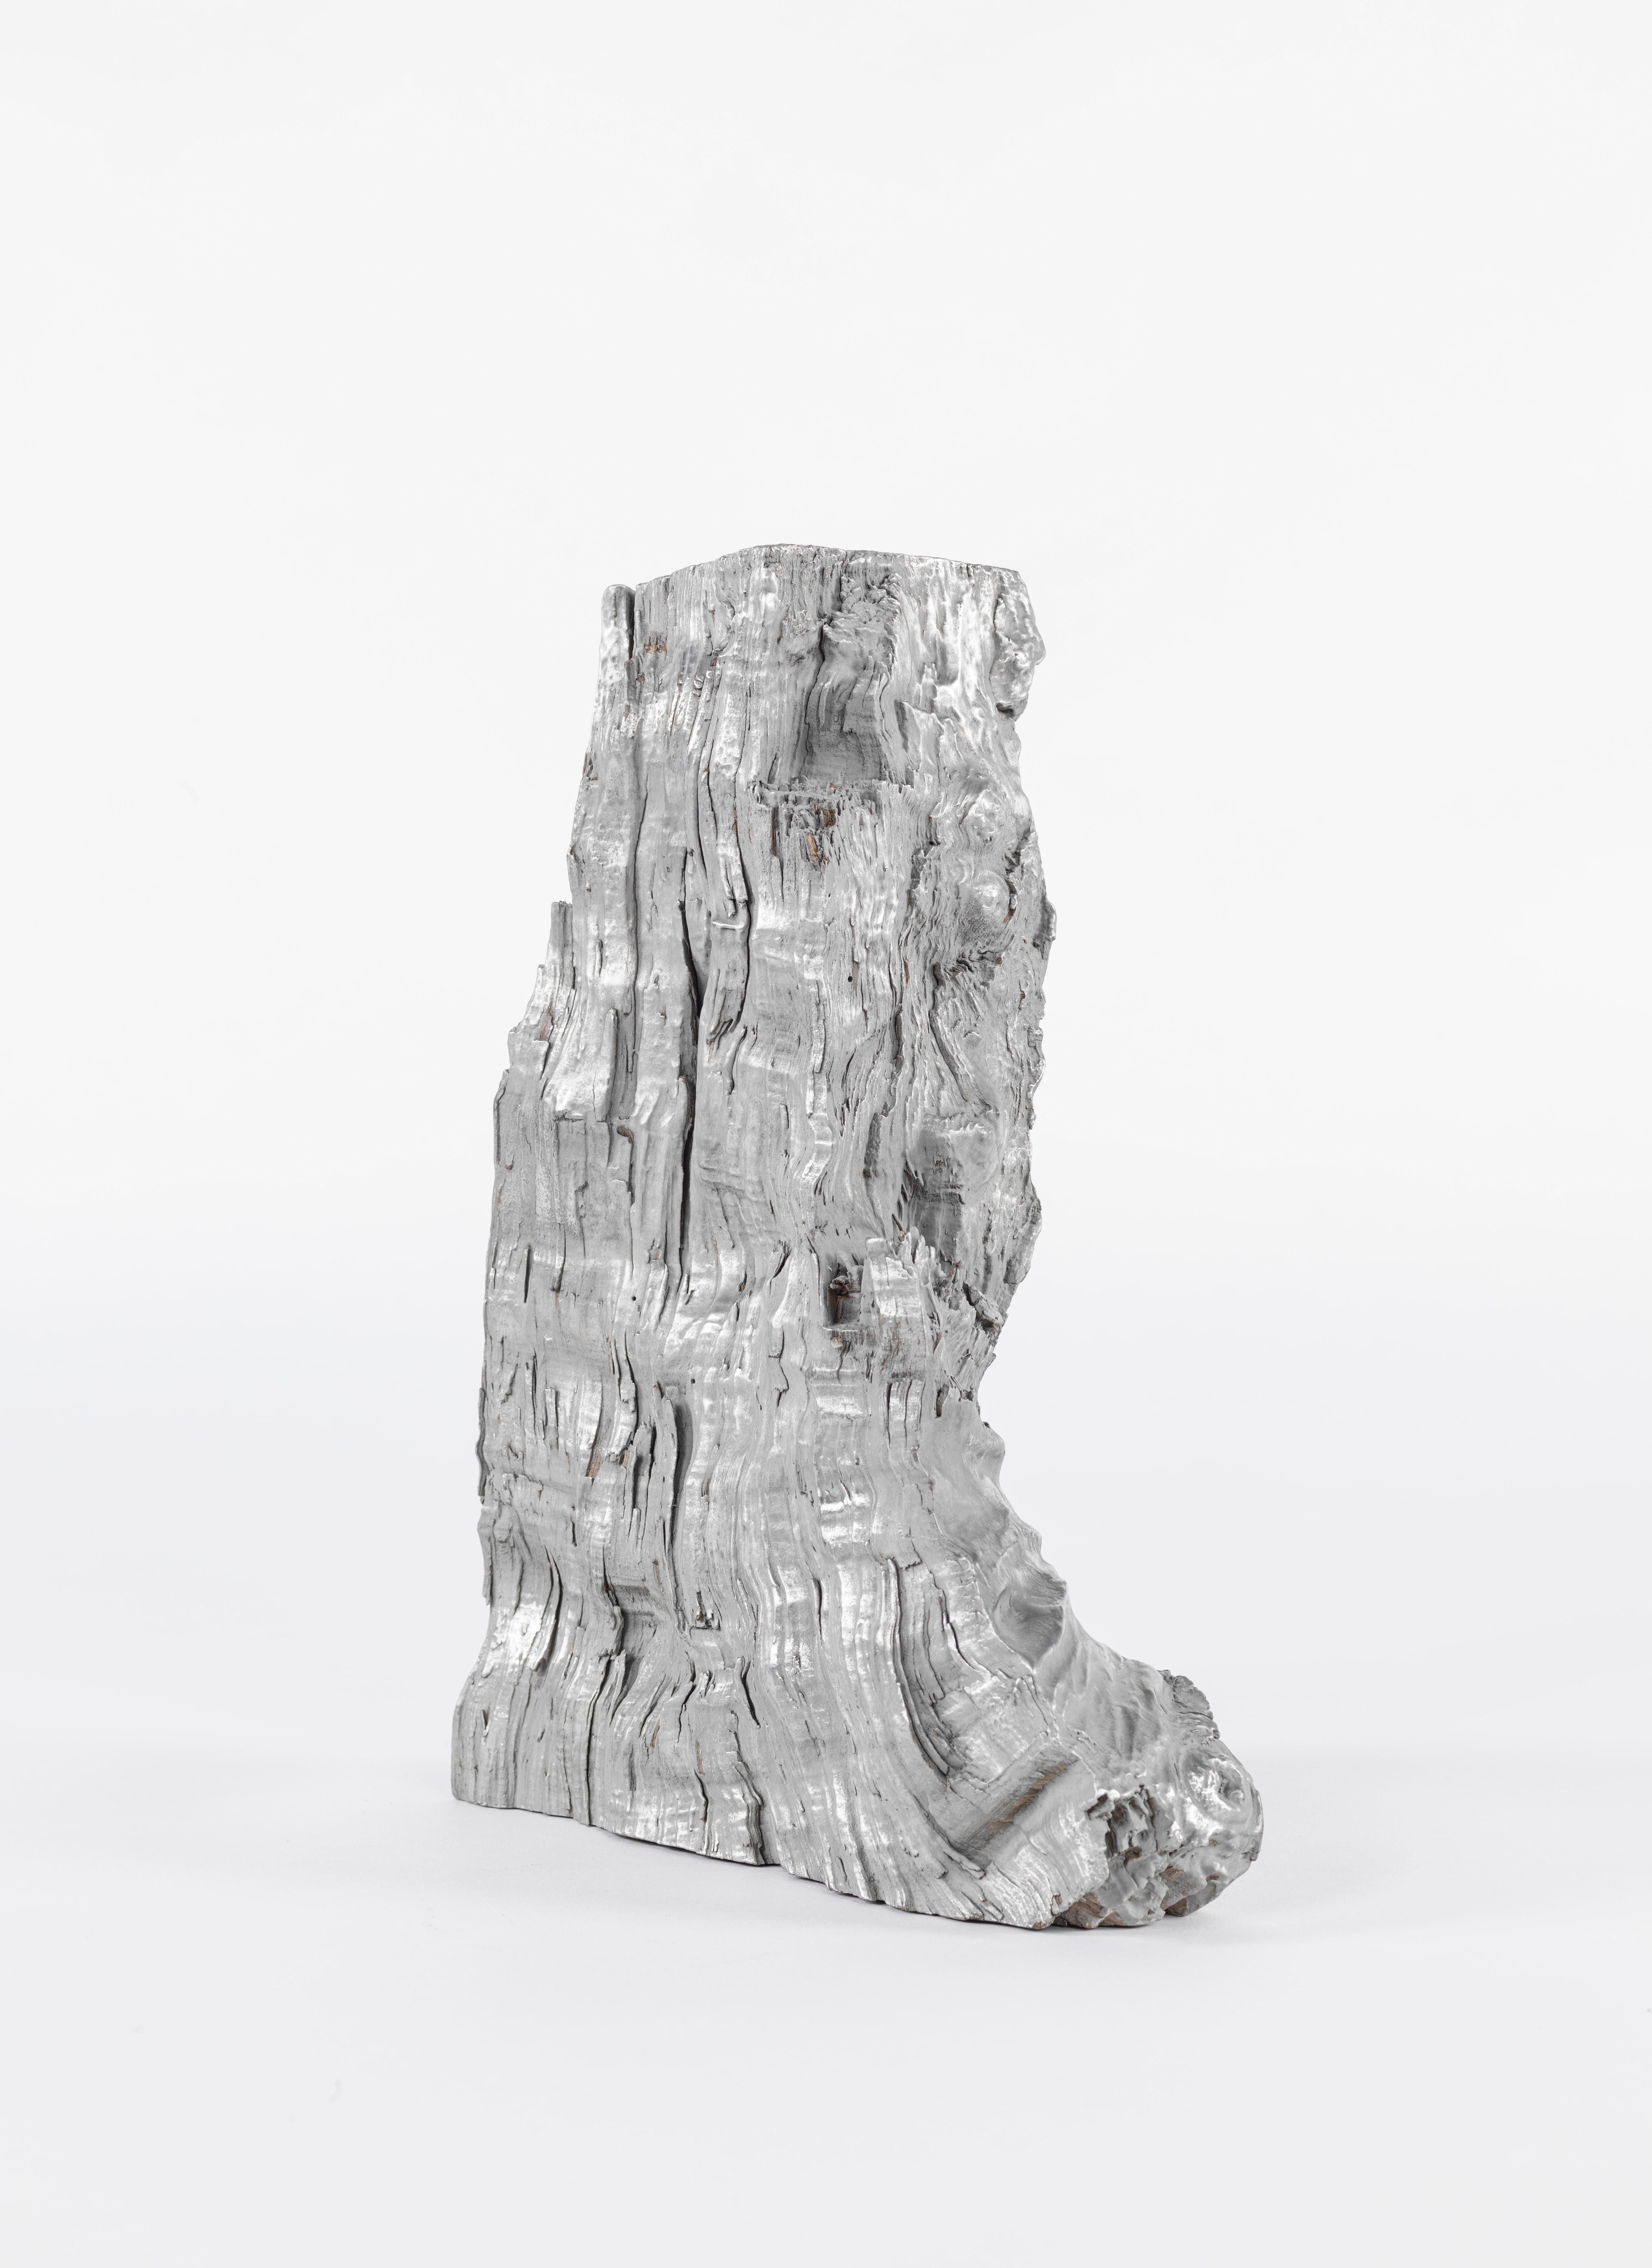 Discover our striking wood sculpture, part of an innovative series that reimagines discarded or burned wood with finesse. This unique piece showcases a cleaved piece of oak coated in polished tin. Meticulous craftsmanship and fine finishing